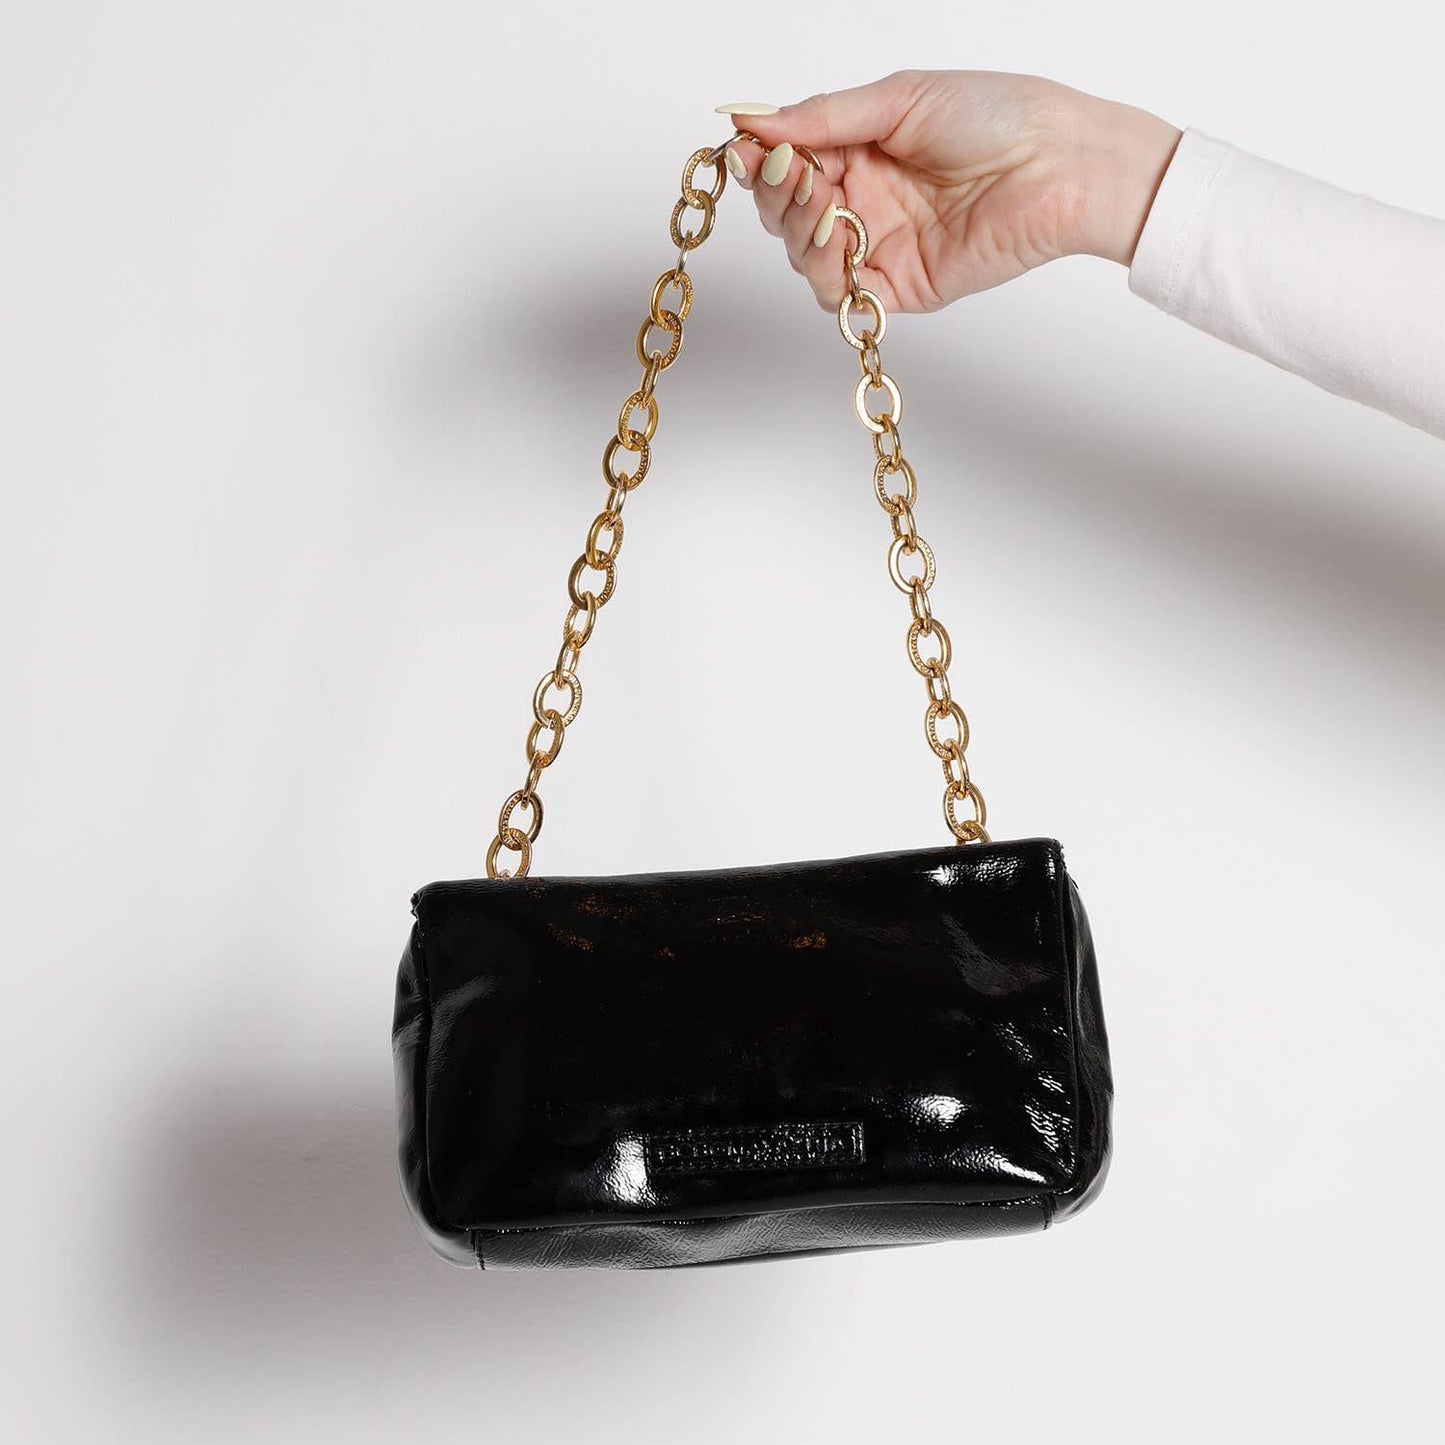 BCBGMAXAZRIA Black Patent Leather Hand Bag with Gold Chain